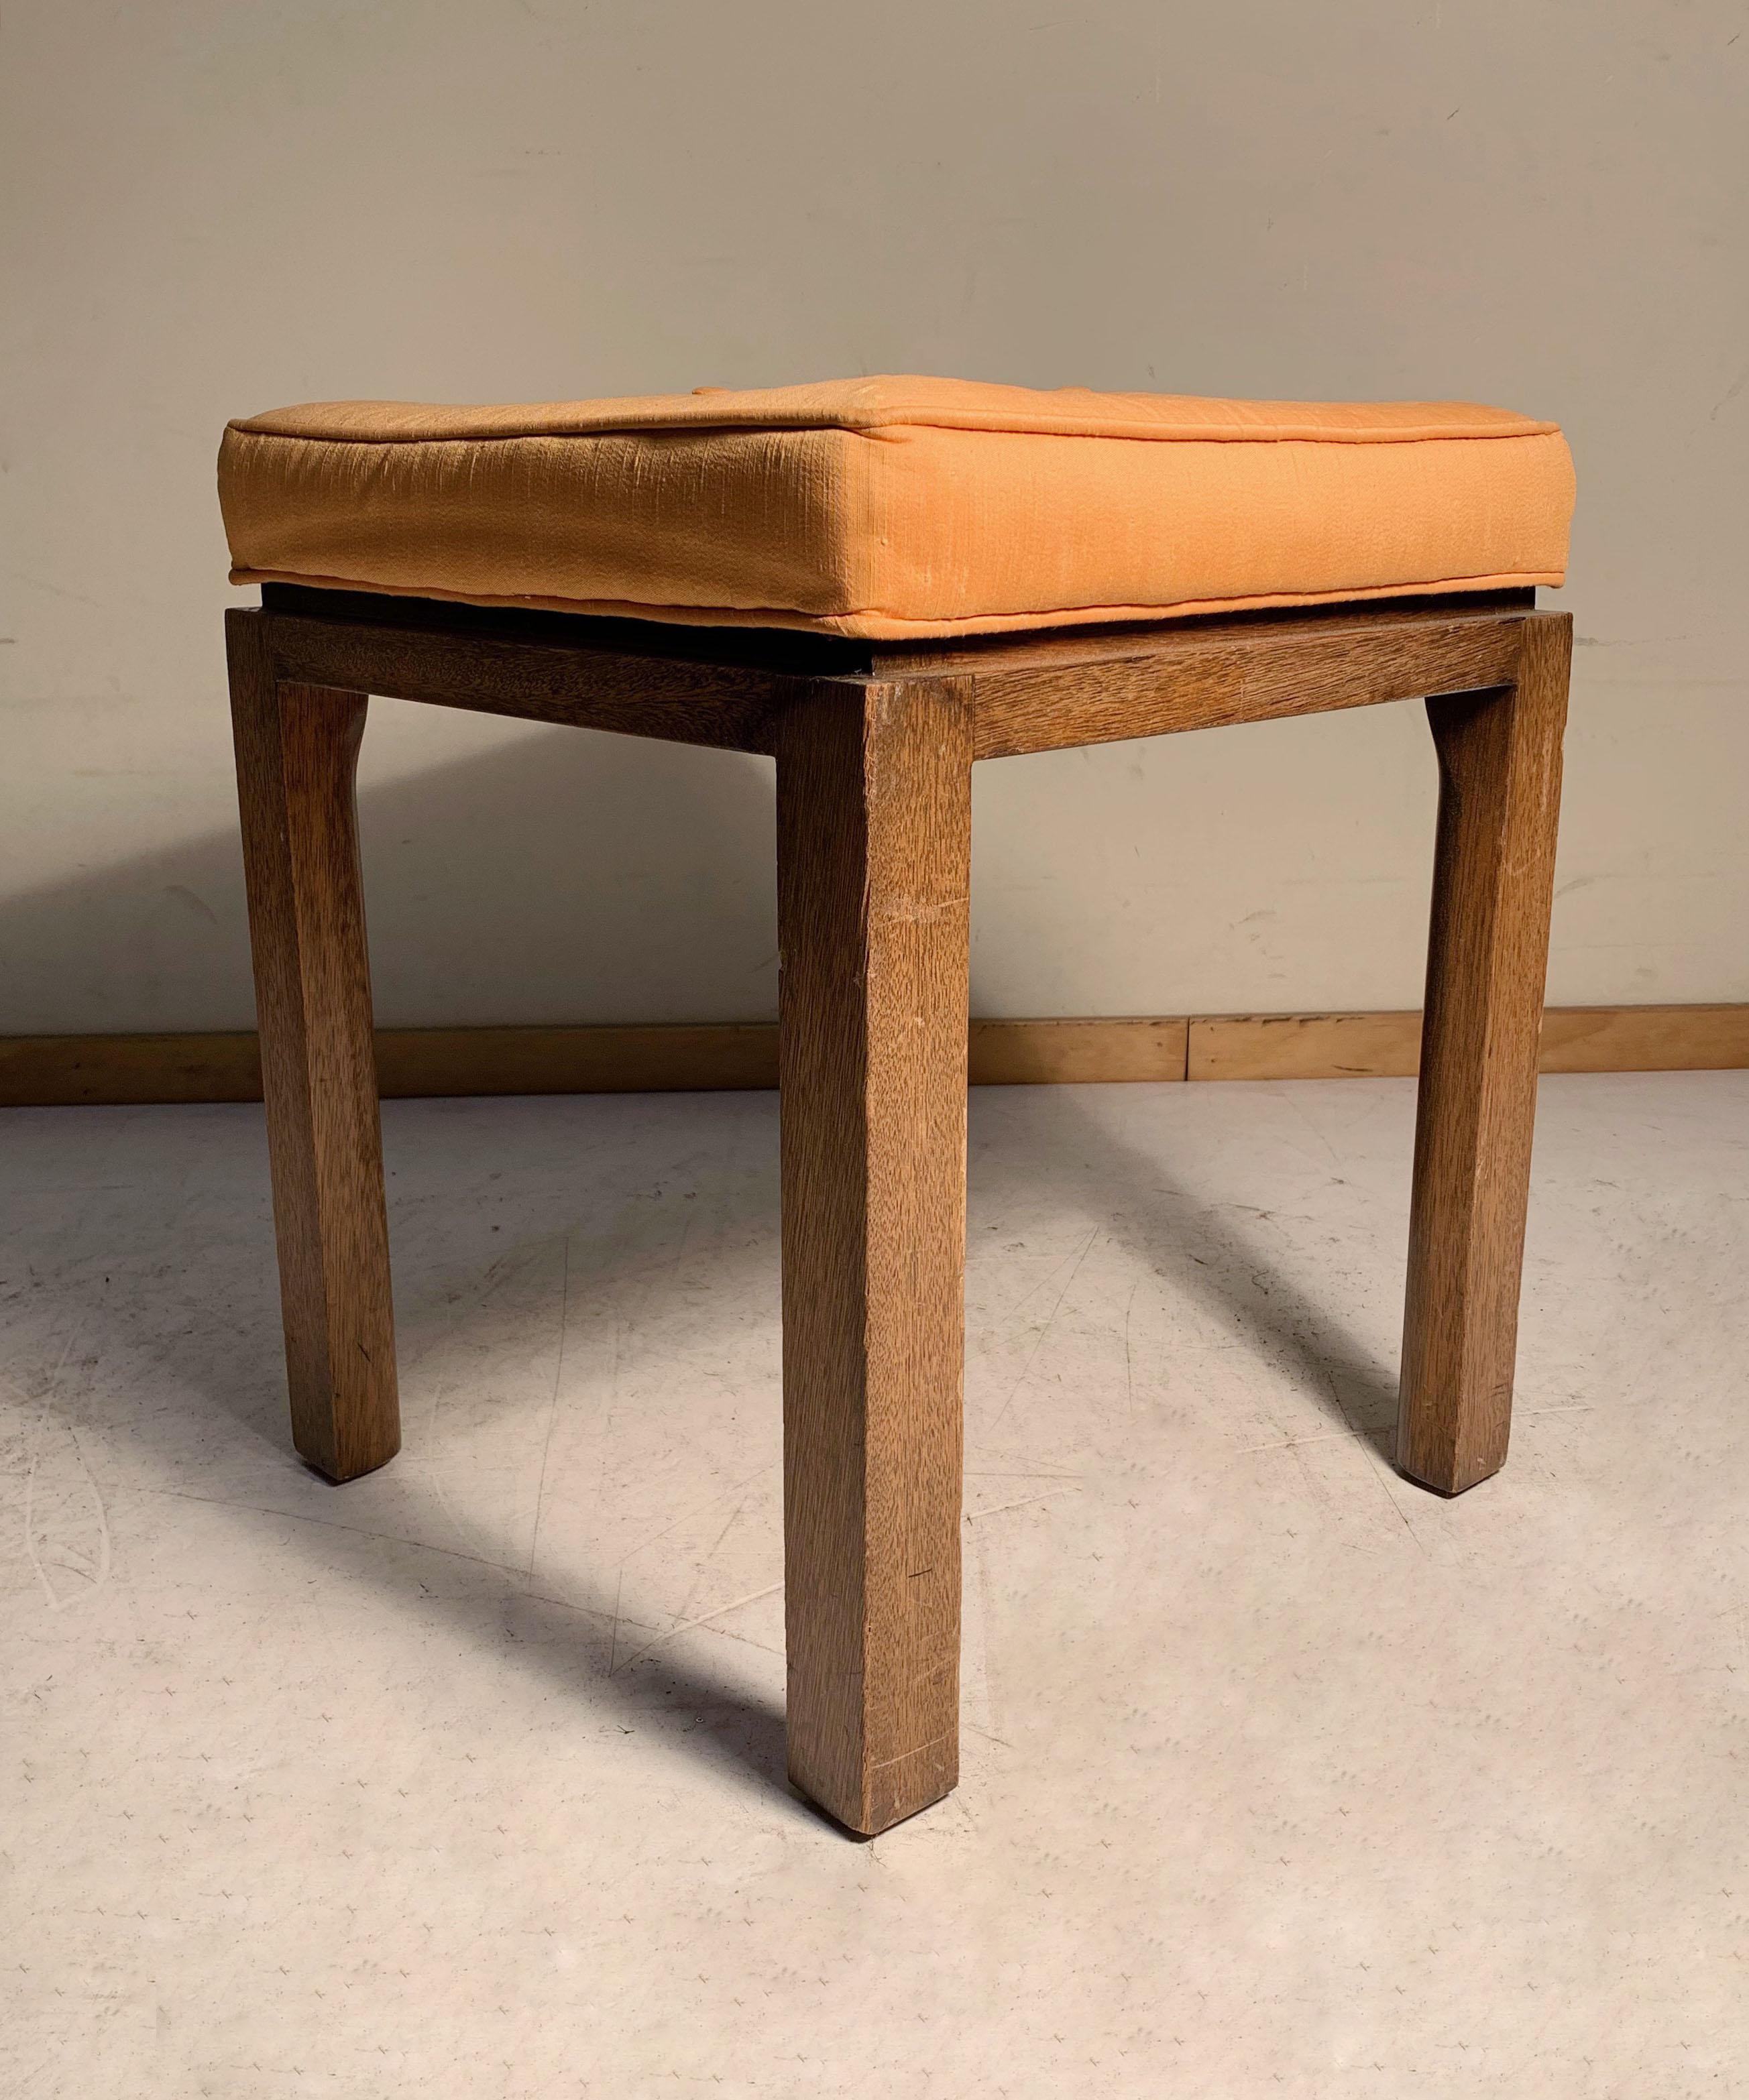 Pair of vintage midcentury stools attributed to Harvey Probber. Legs have a radius interior side. I believe these most likely need re-upholstery. Some wear to the wood bases as well. In the manner of Milo Baughman and Edward Wormley for Dunbar